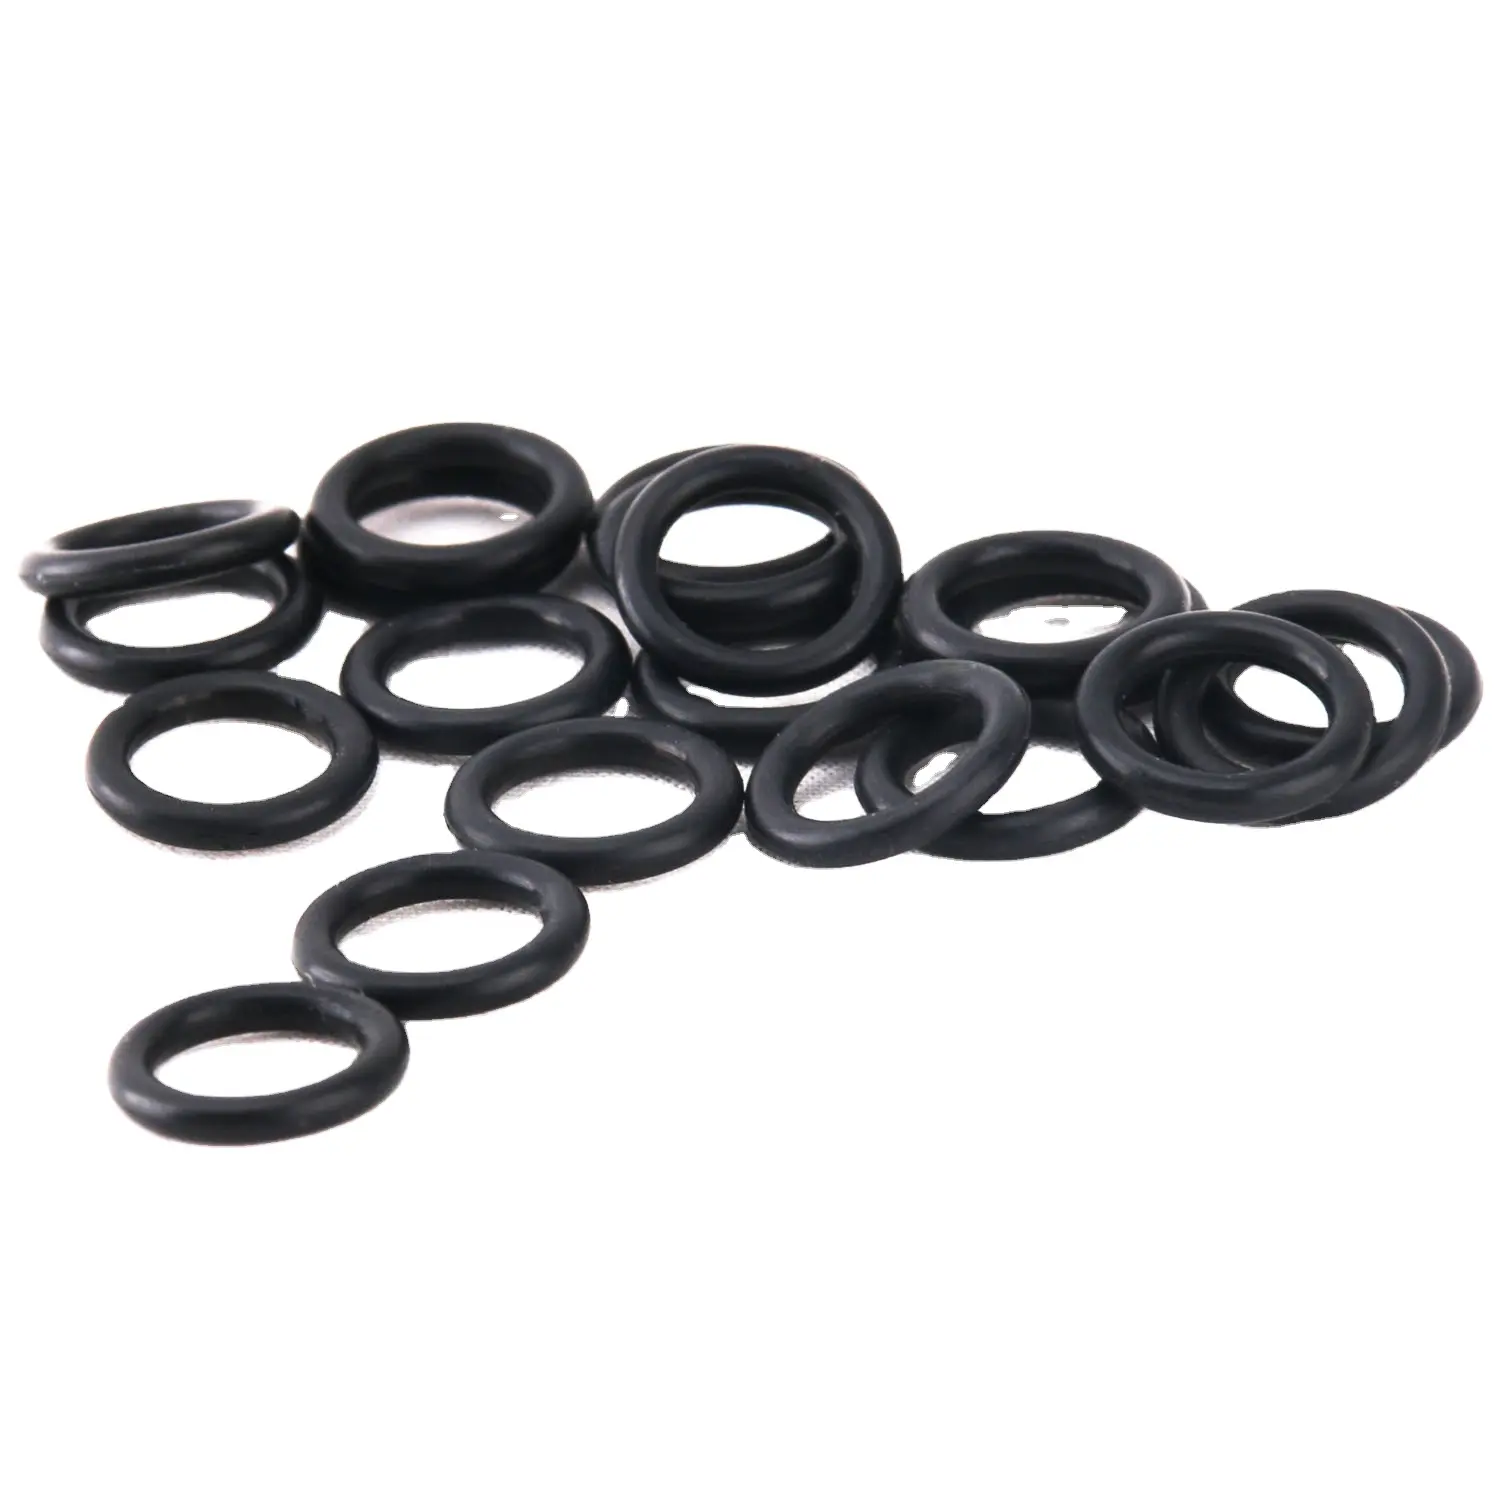 O RING EPDM RUBBER O RINGS FOR SEALS